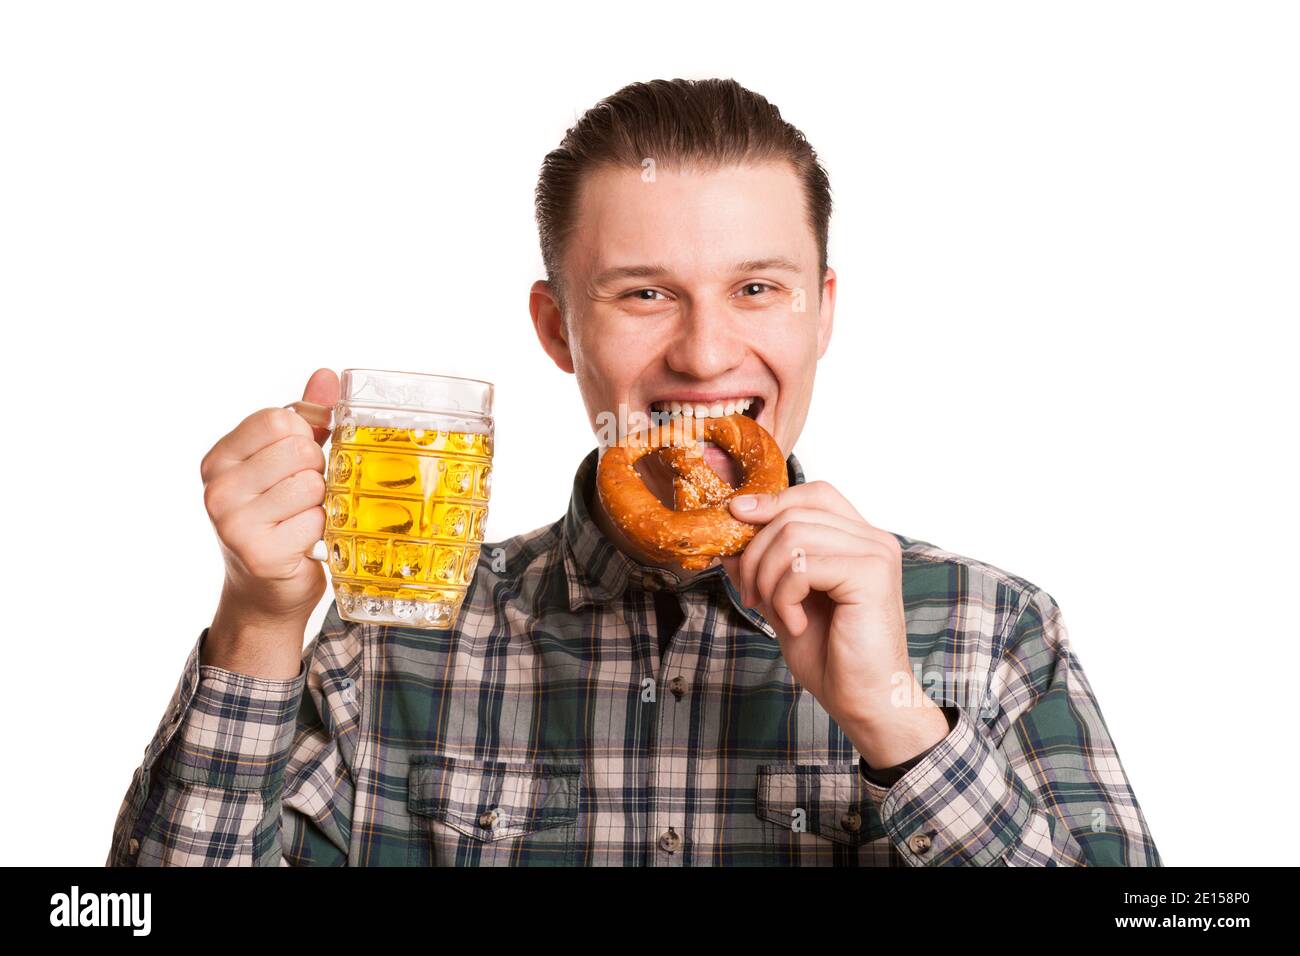 Cheerful young man enjoying eating delicious pretzel, holding a glass of beer in his hand while celebrating Oktoberfest. Happy handsome man drinking b Stock Photo